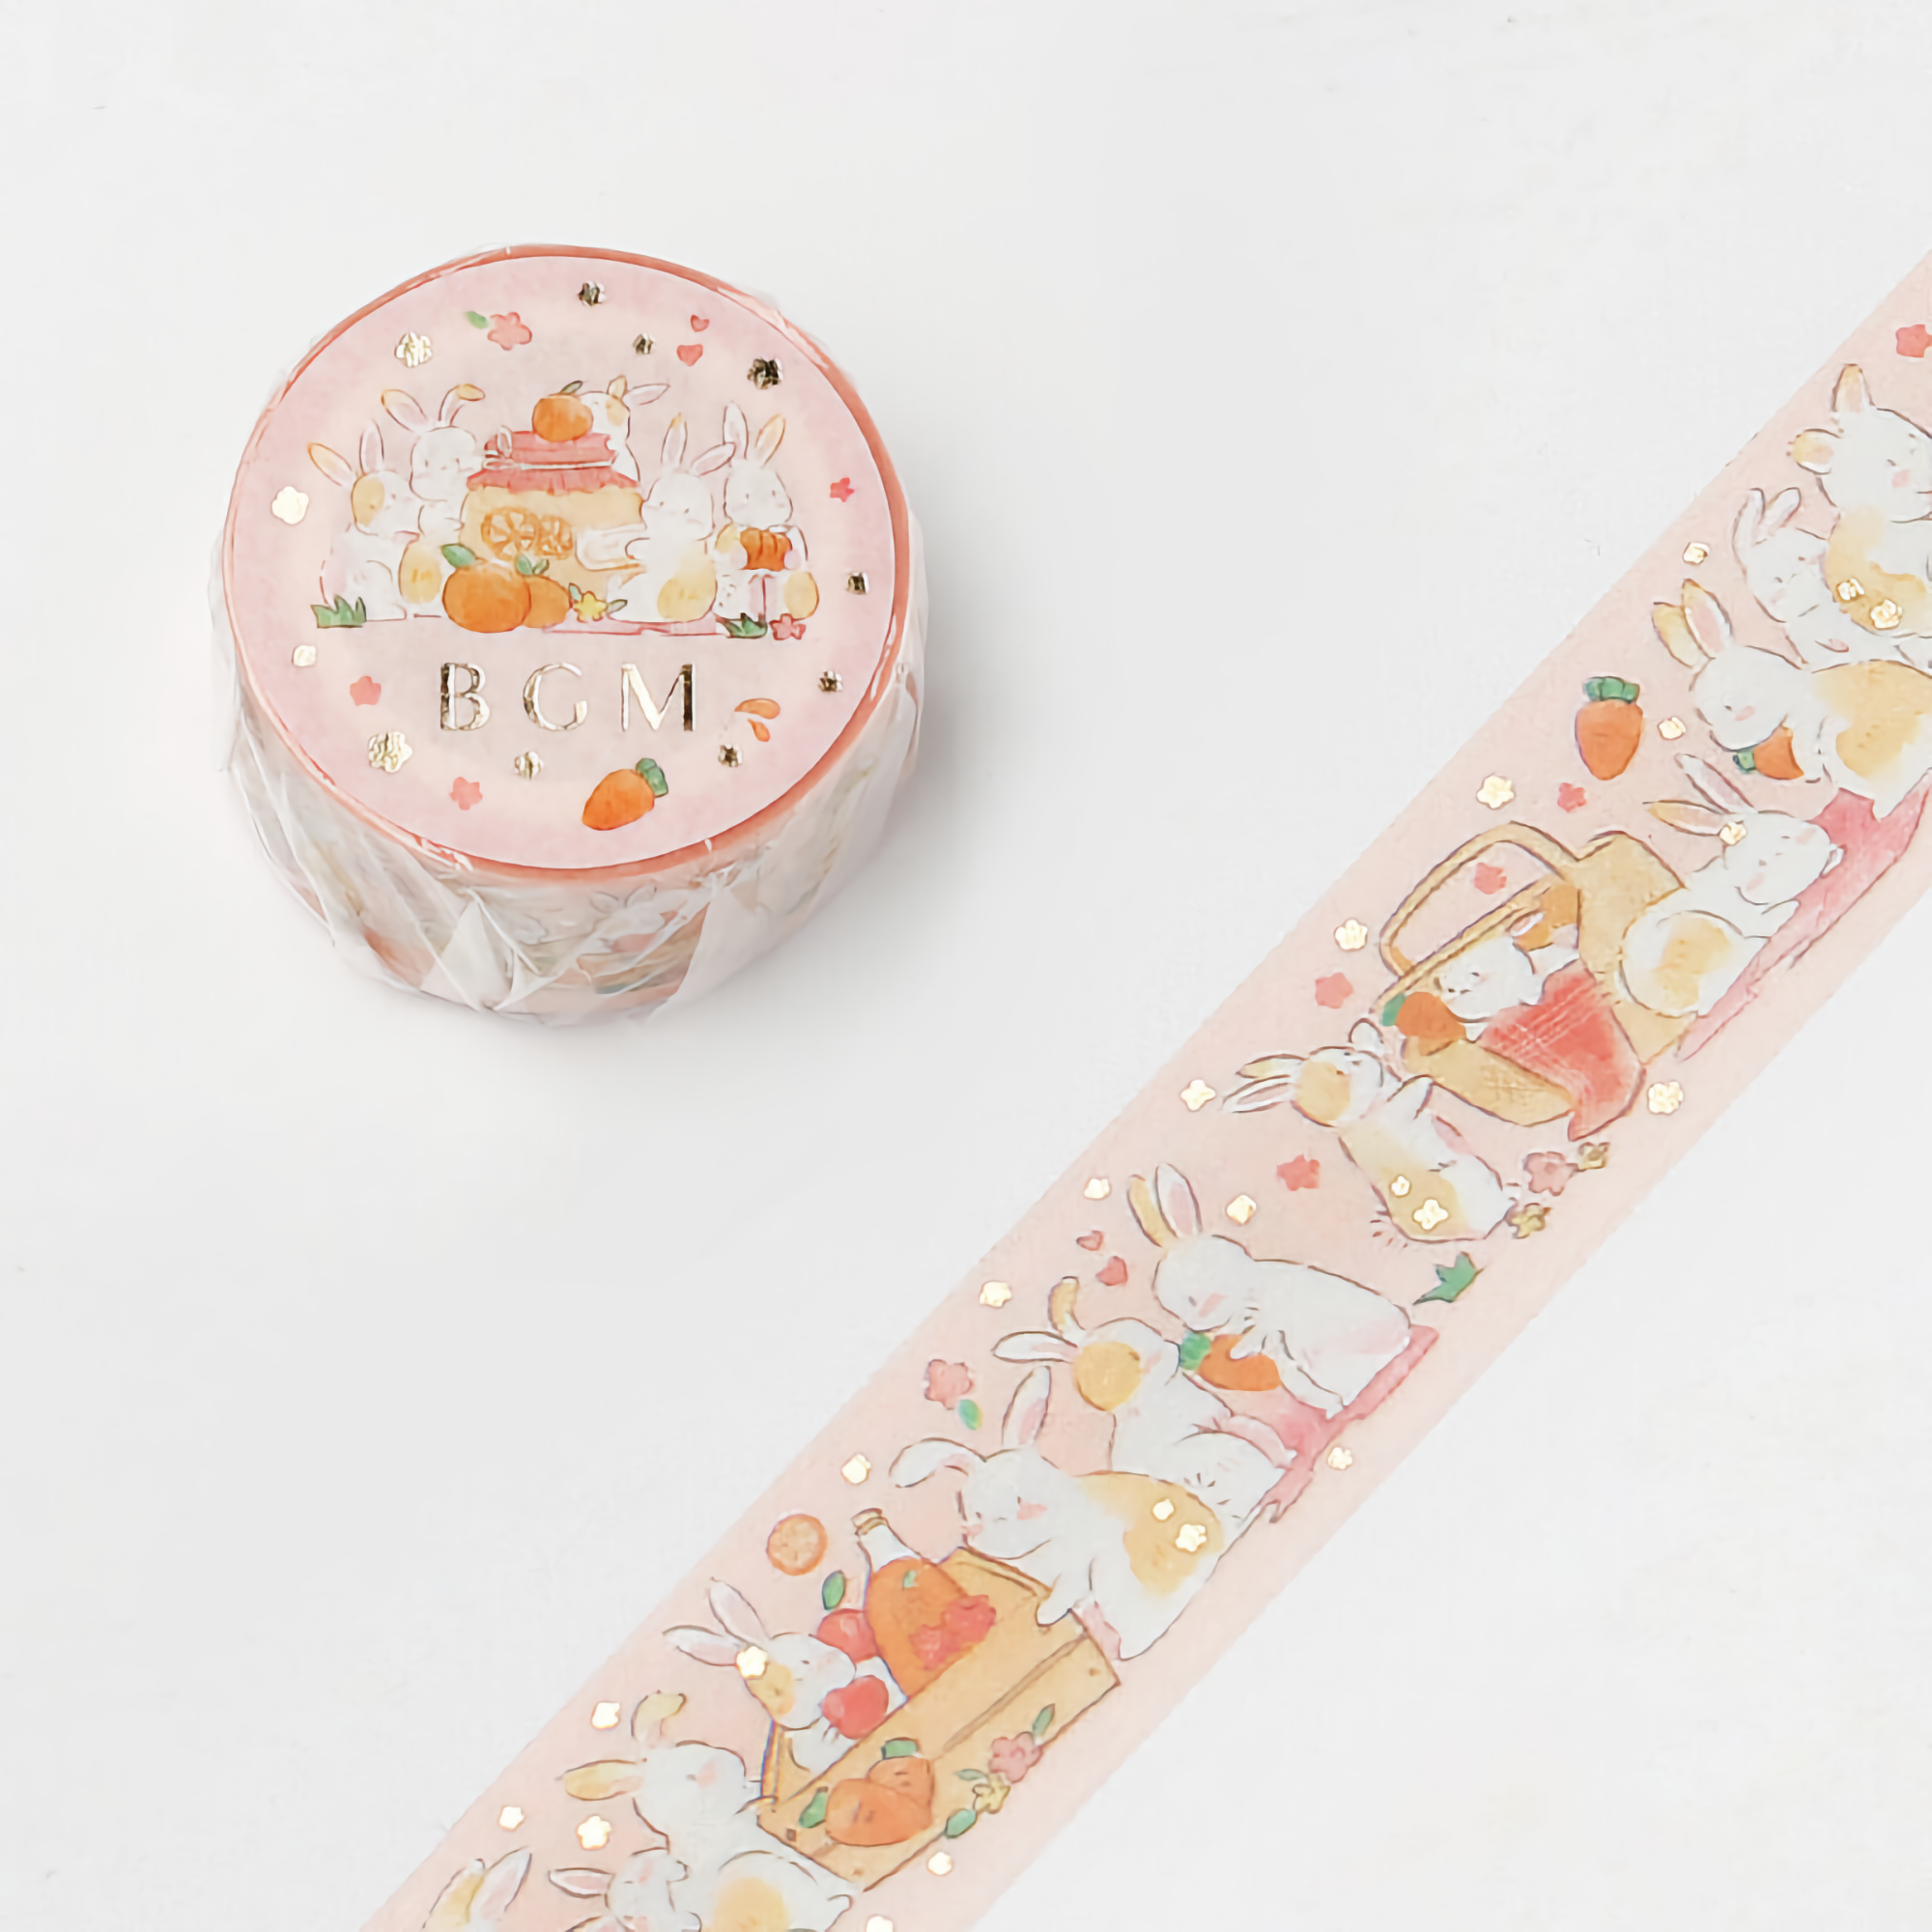 BGM Washi Tape Special Foil Animal Party Picnic 20 mm